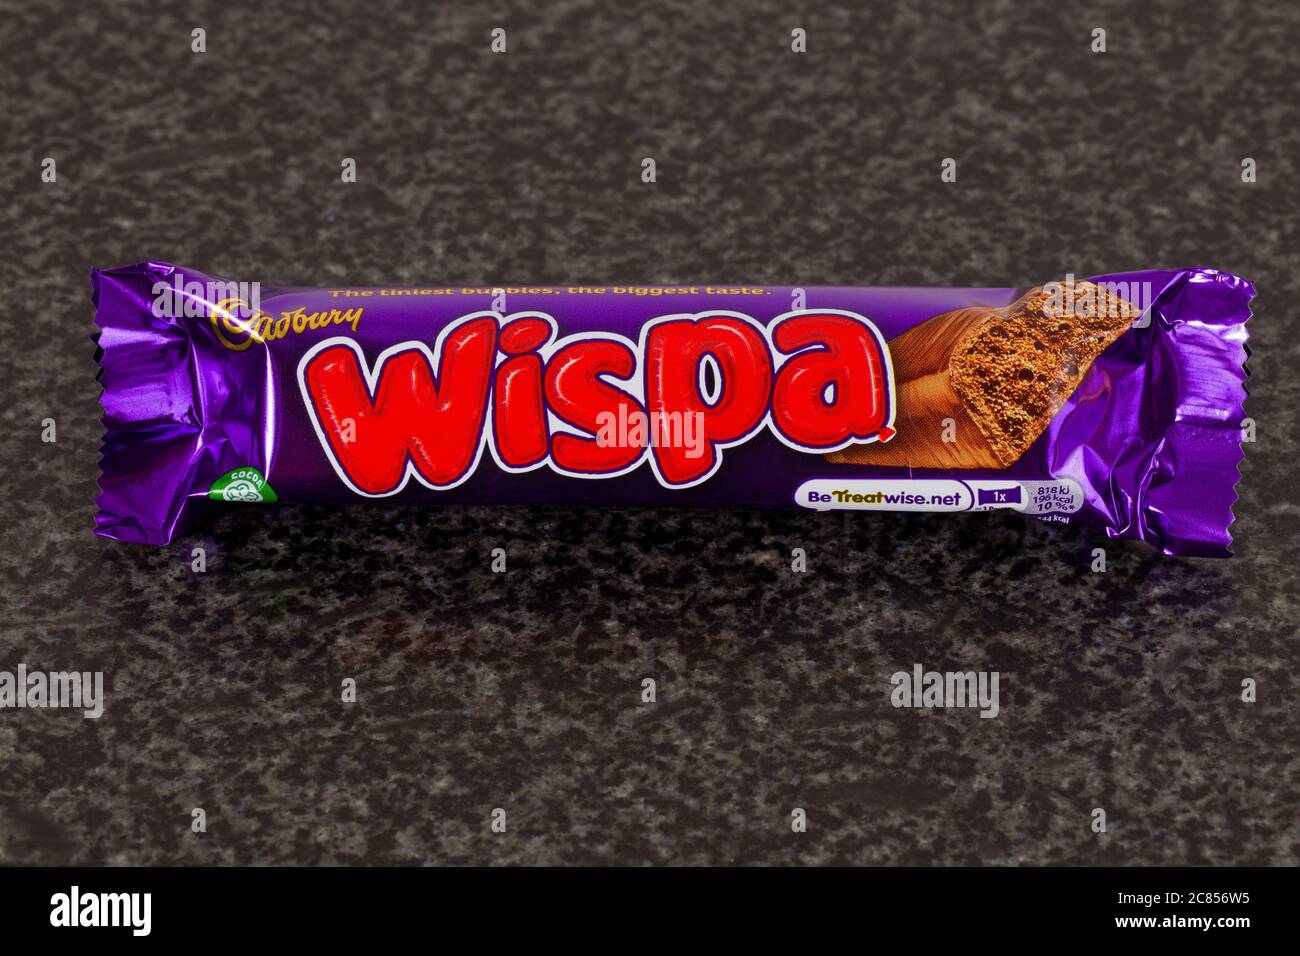 LONDON, UK - MAY 6TH 2016: An Unopened Wispa Gold Chocolate Bar  Manufactured By Cadbury, Pictured Over A Plain White Background On 6th May  2016. Stock Photo, Picture and Royalty Free Image. Image 58701336.